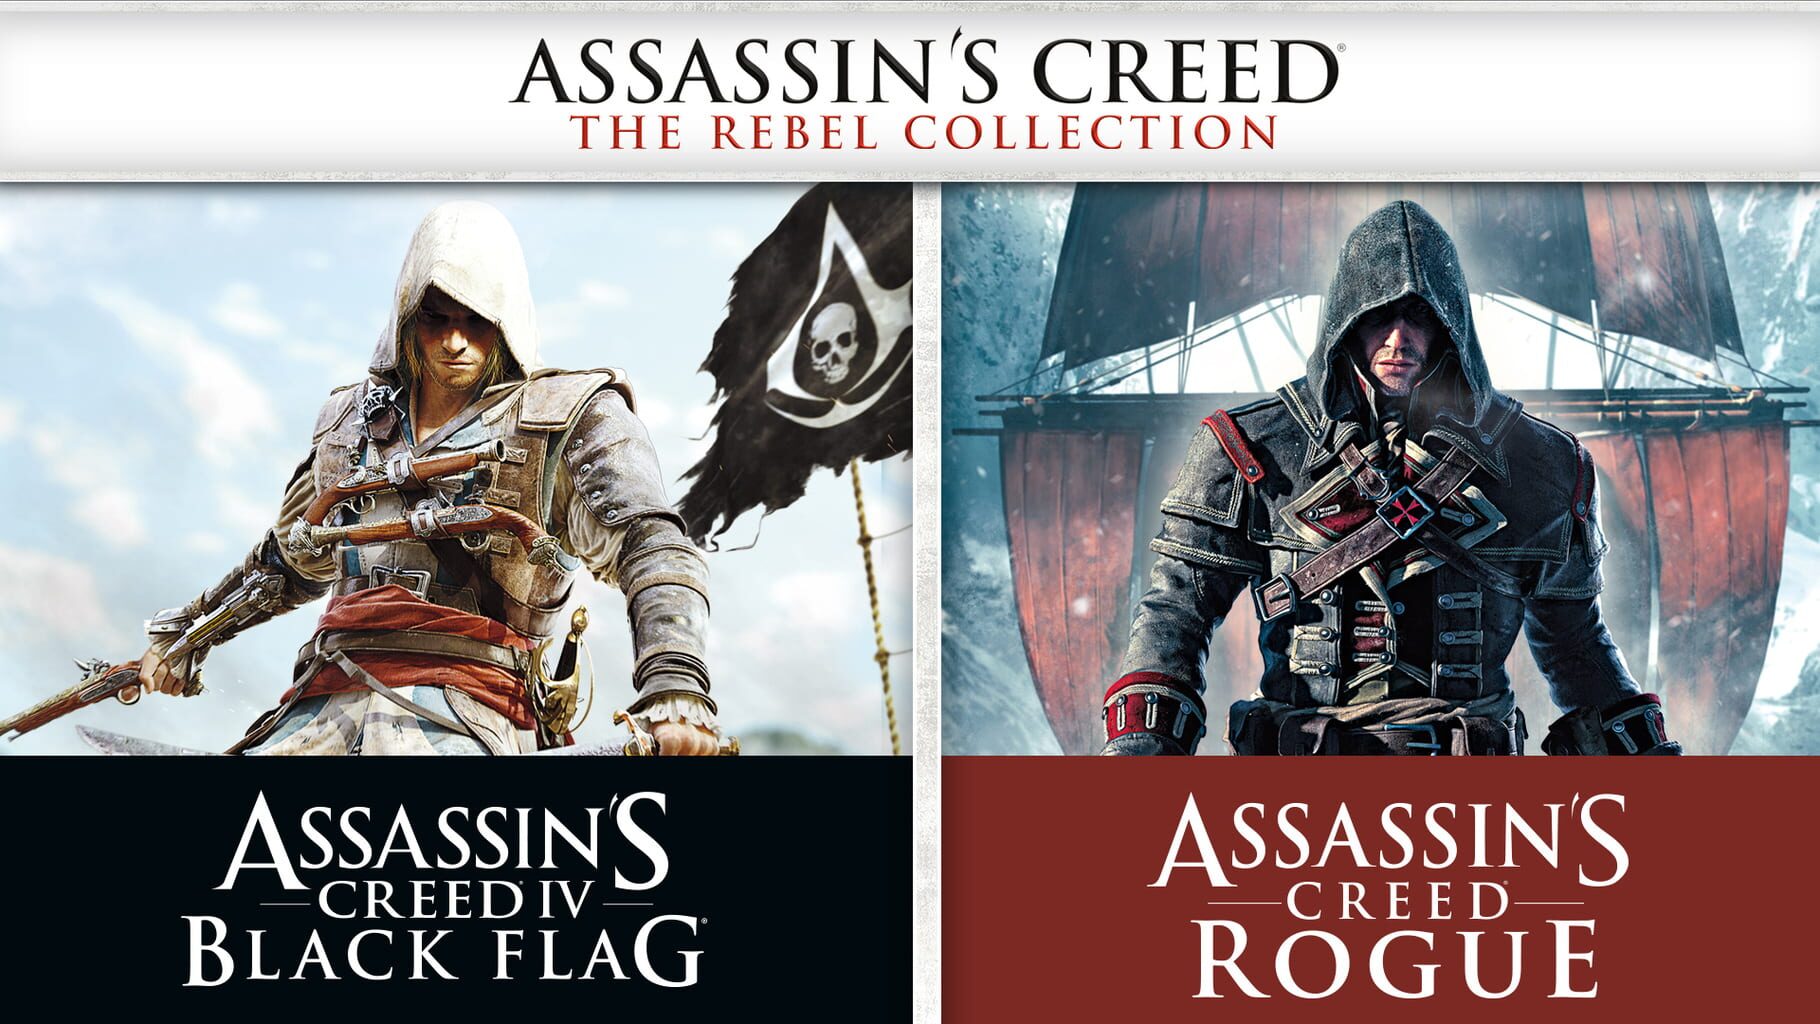 Arte - Assassin's Creed: The Rebel Collection